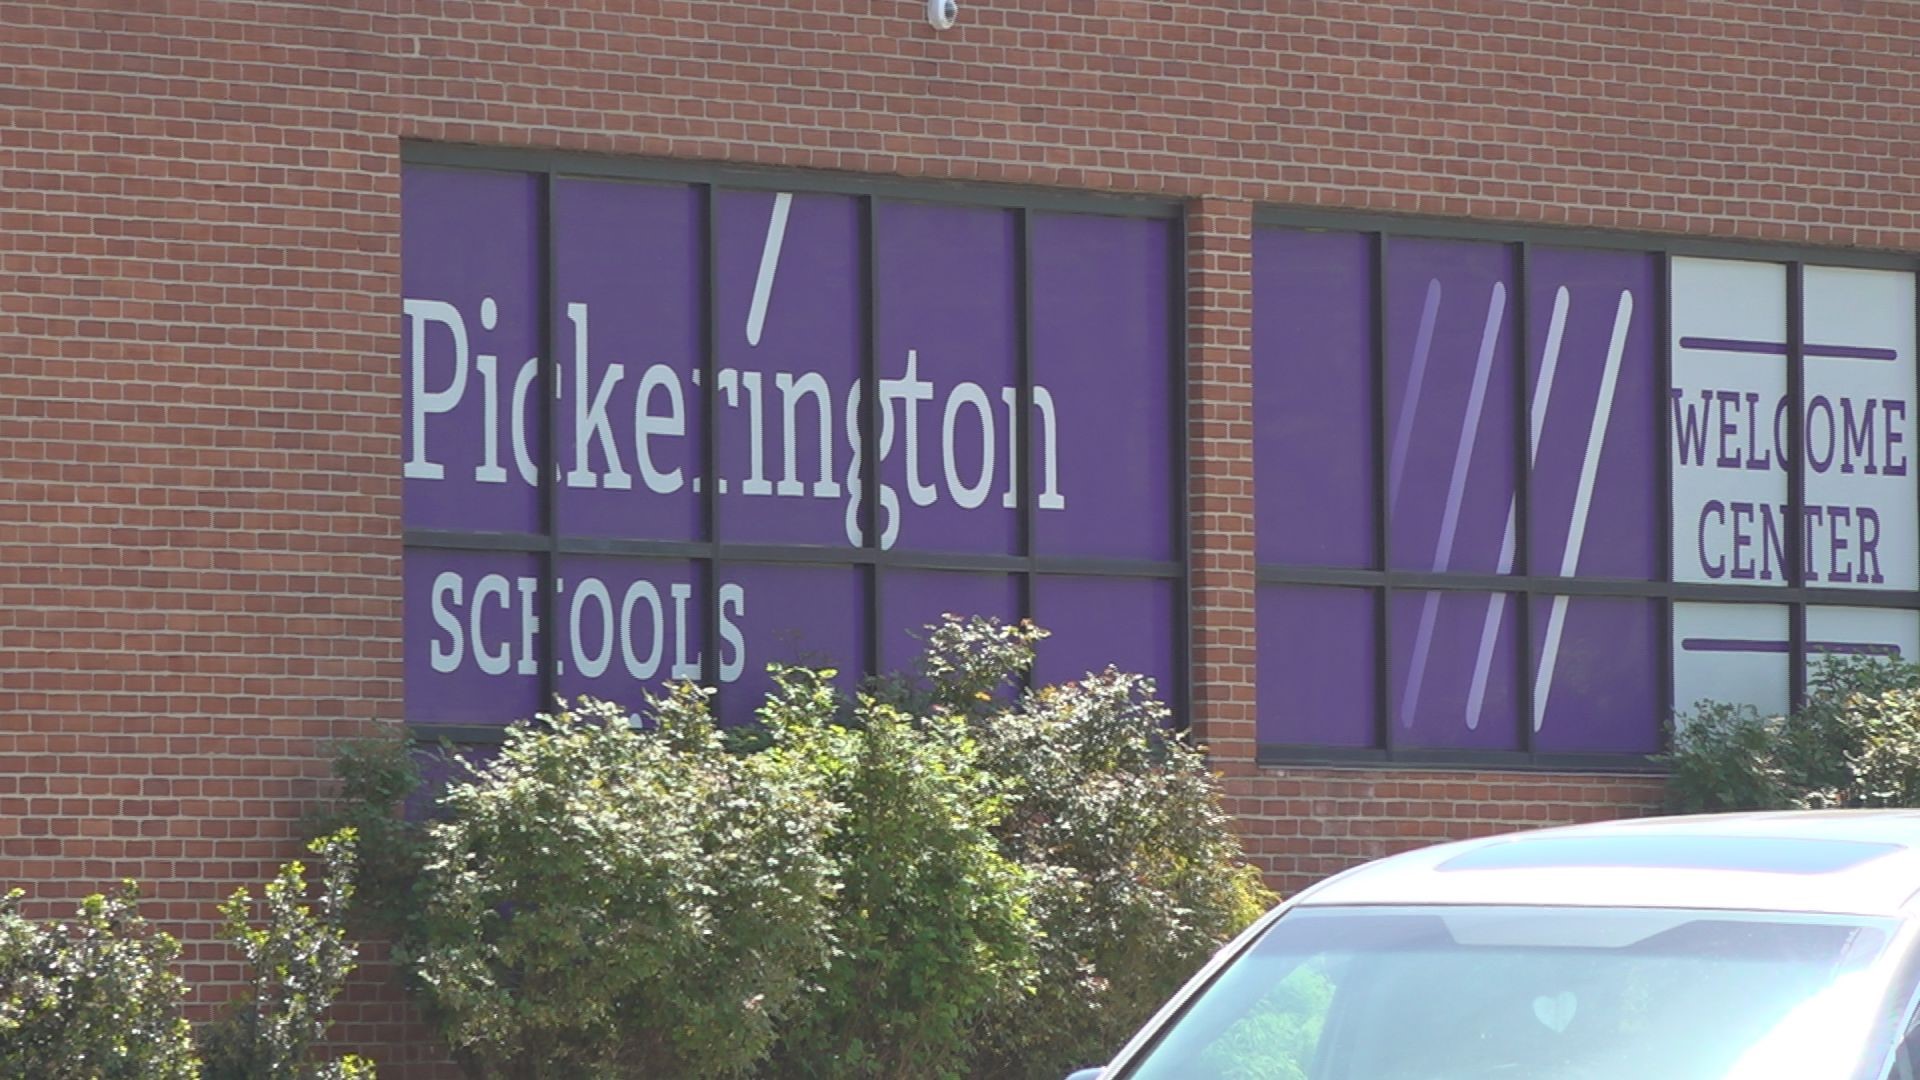 The Pickerington School Board presented a plan to implement long-term hybrid learning. This, as enrollment is steadily increasing in schools across central Ohio.